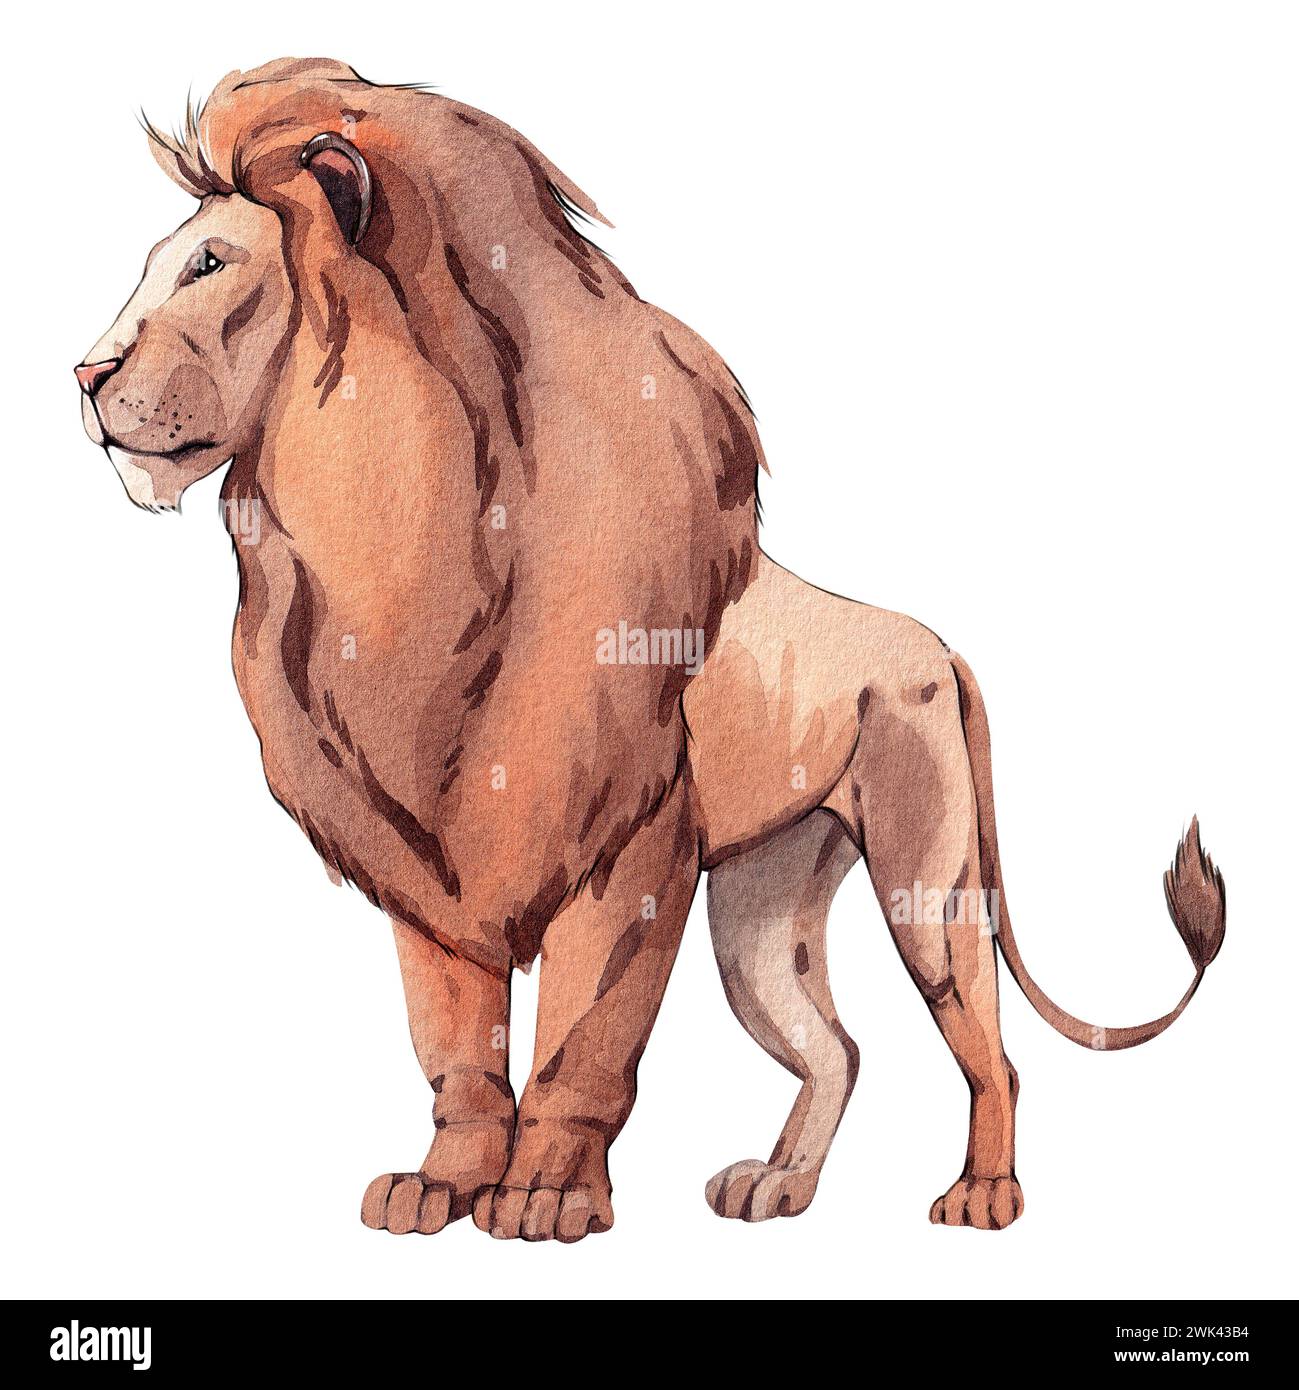 Lion watercolor illustration isolated on white background. Savannah animals. African animals. JPG format. High resolution Stock Photo